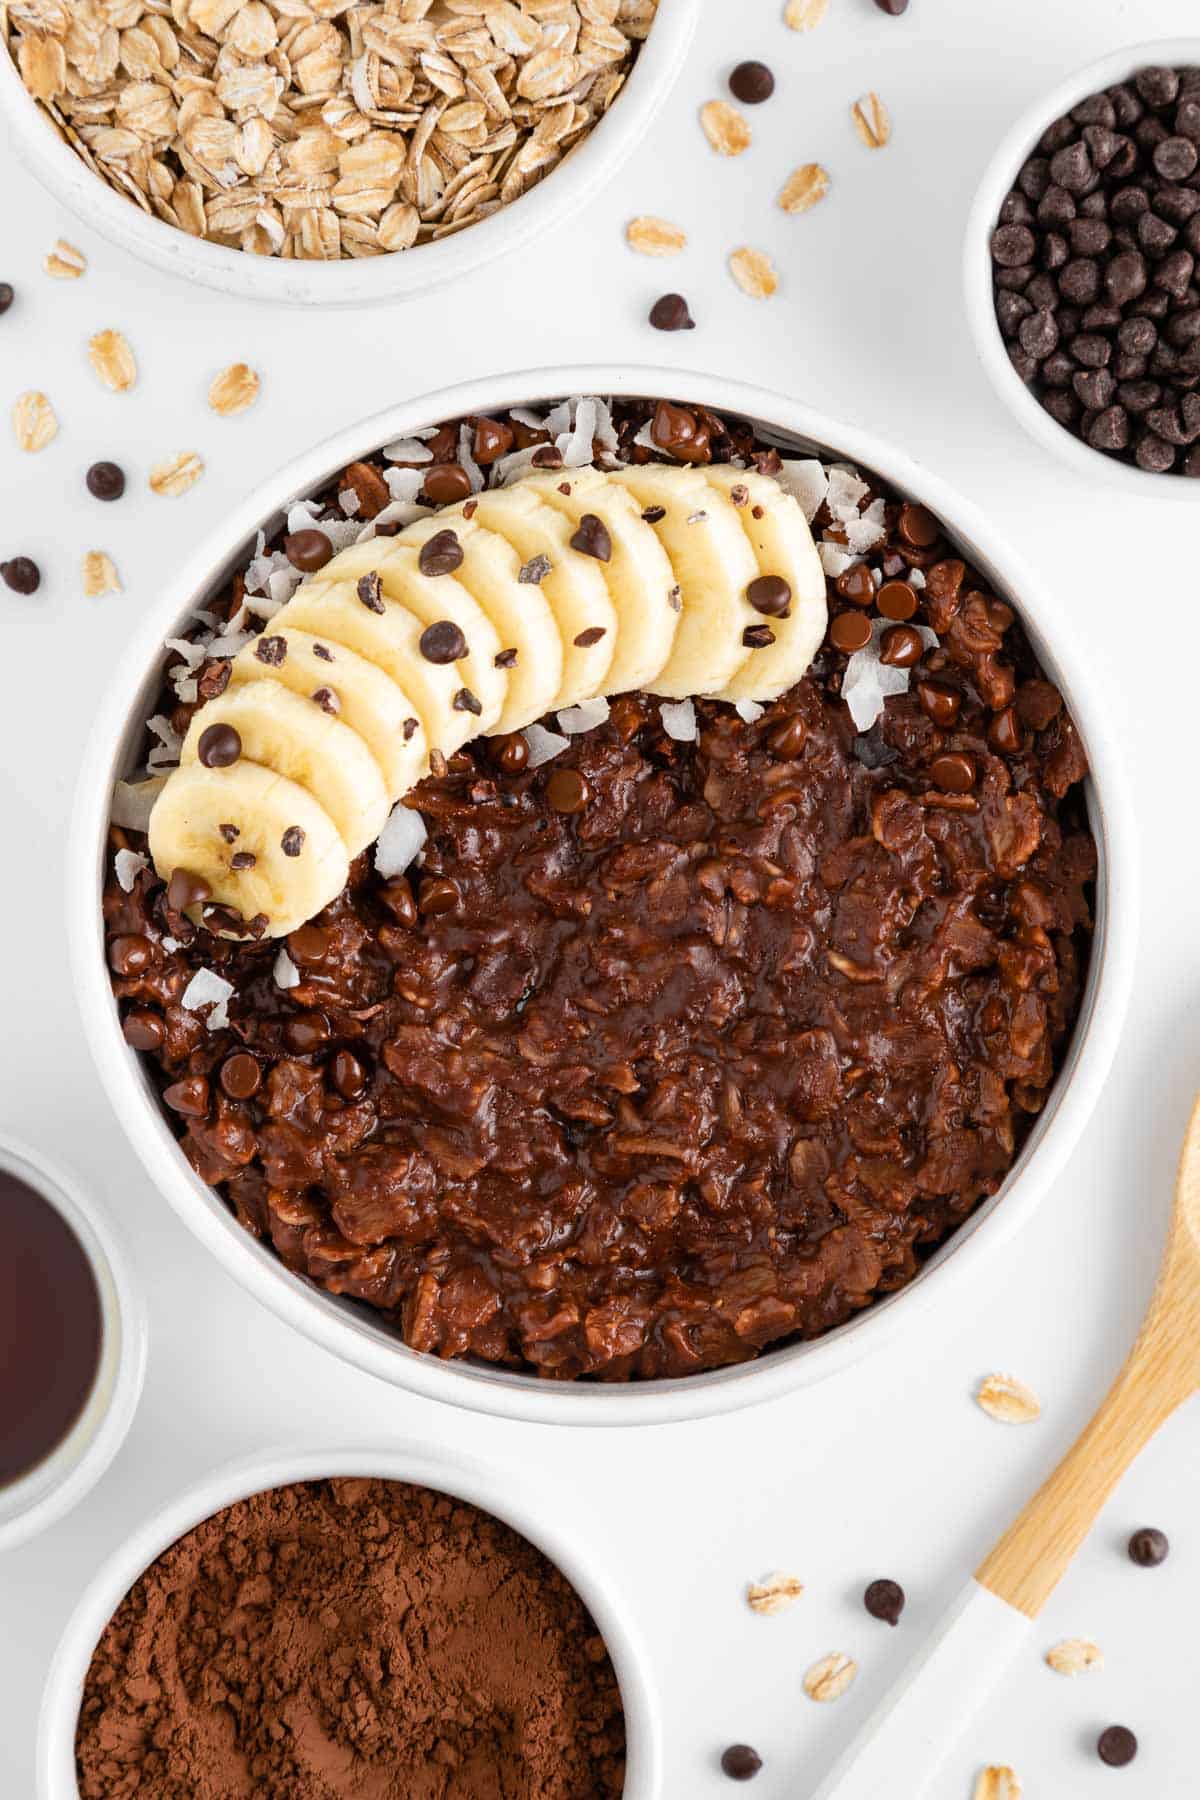 a bowl of chocolate oatmeal surrounded by small white bowls filled with cocoa powder, maple syrup, chocolate chips, and rolled oats